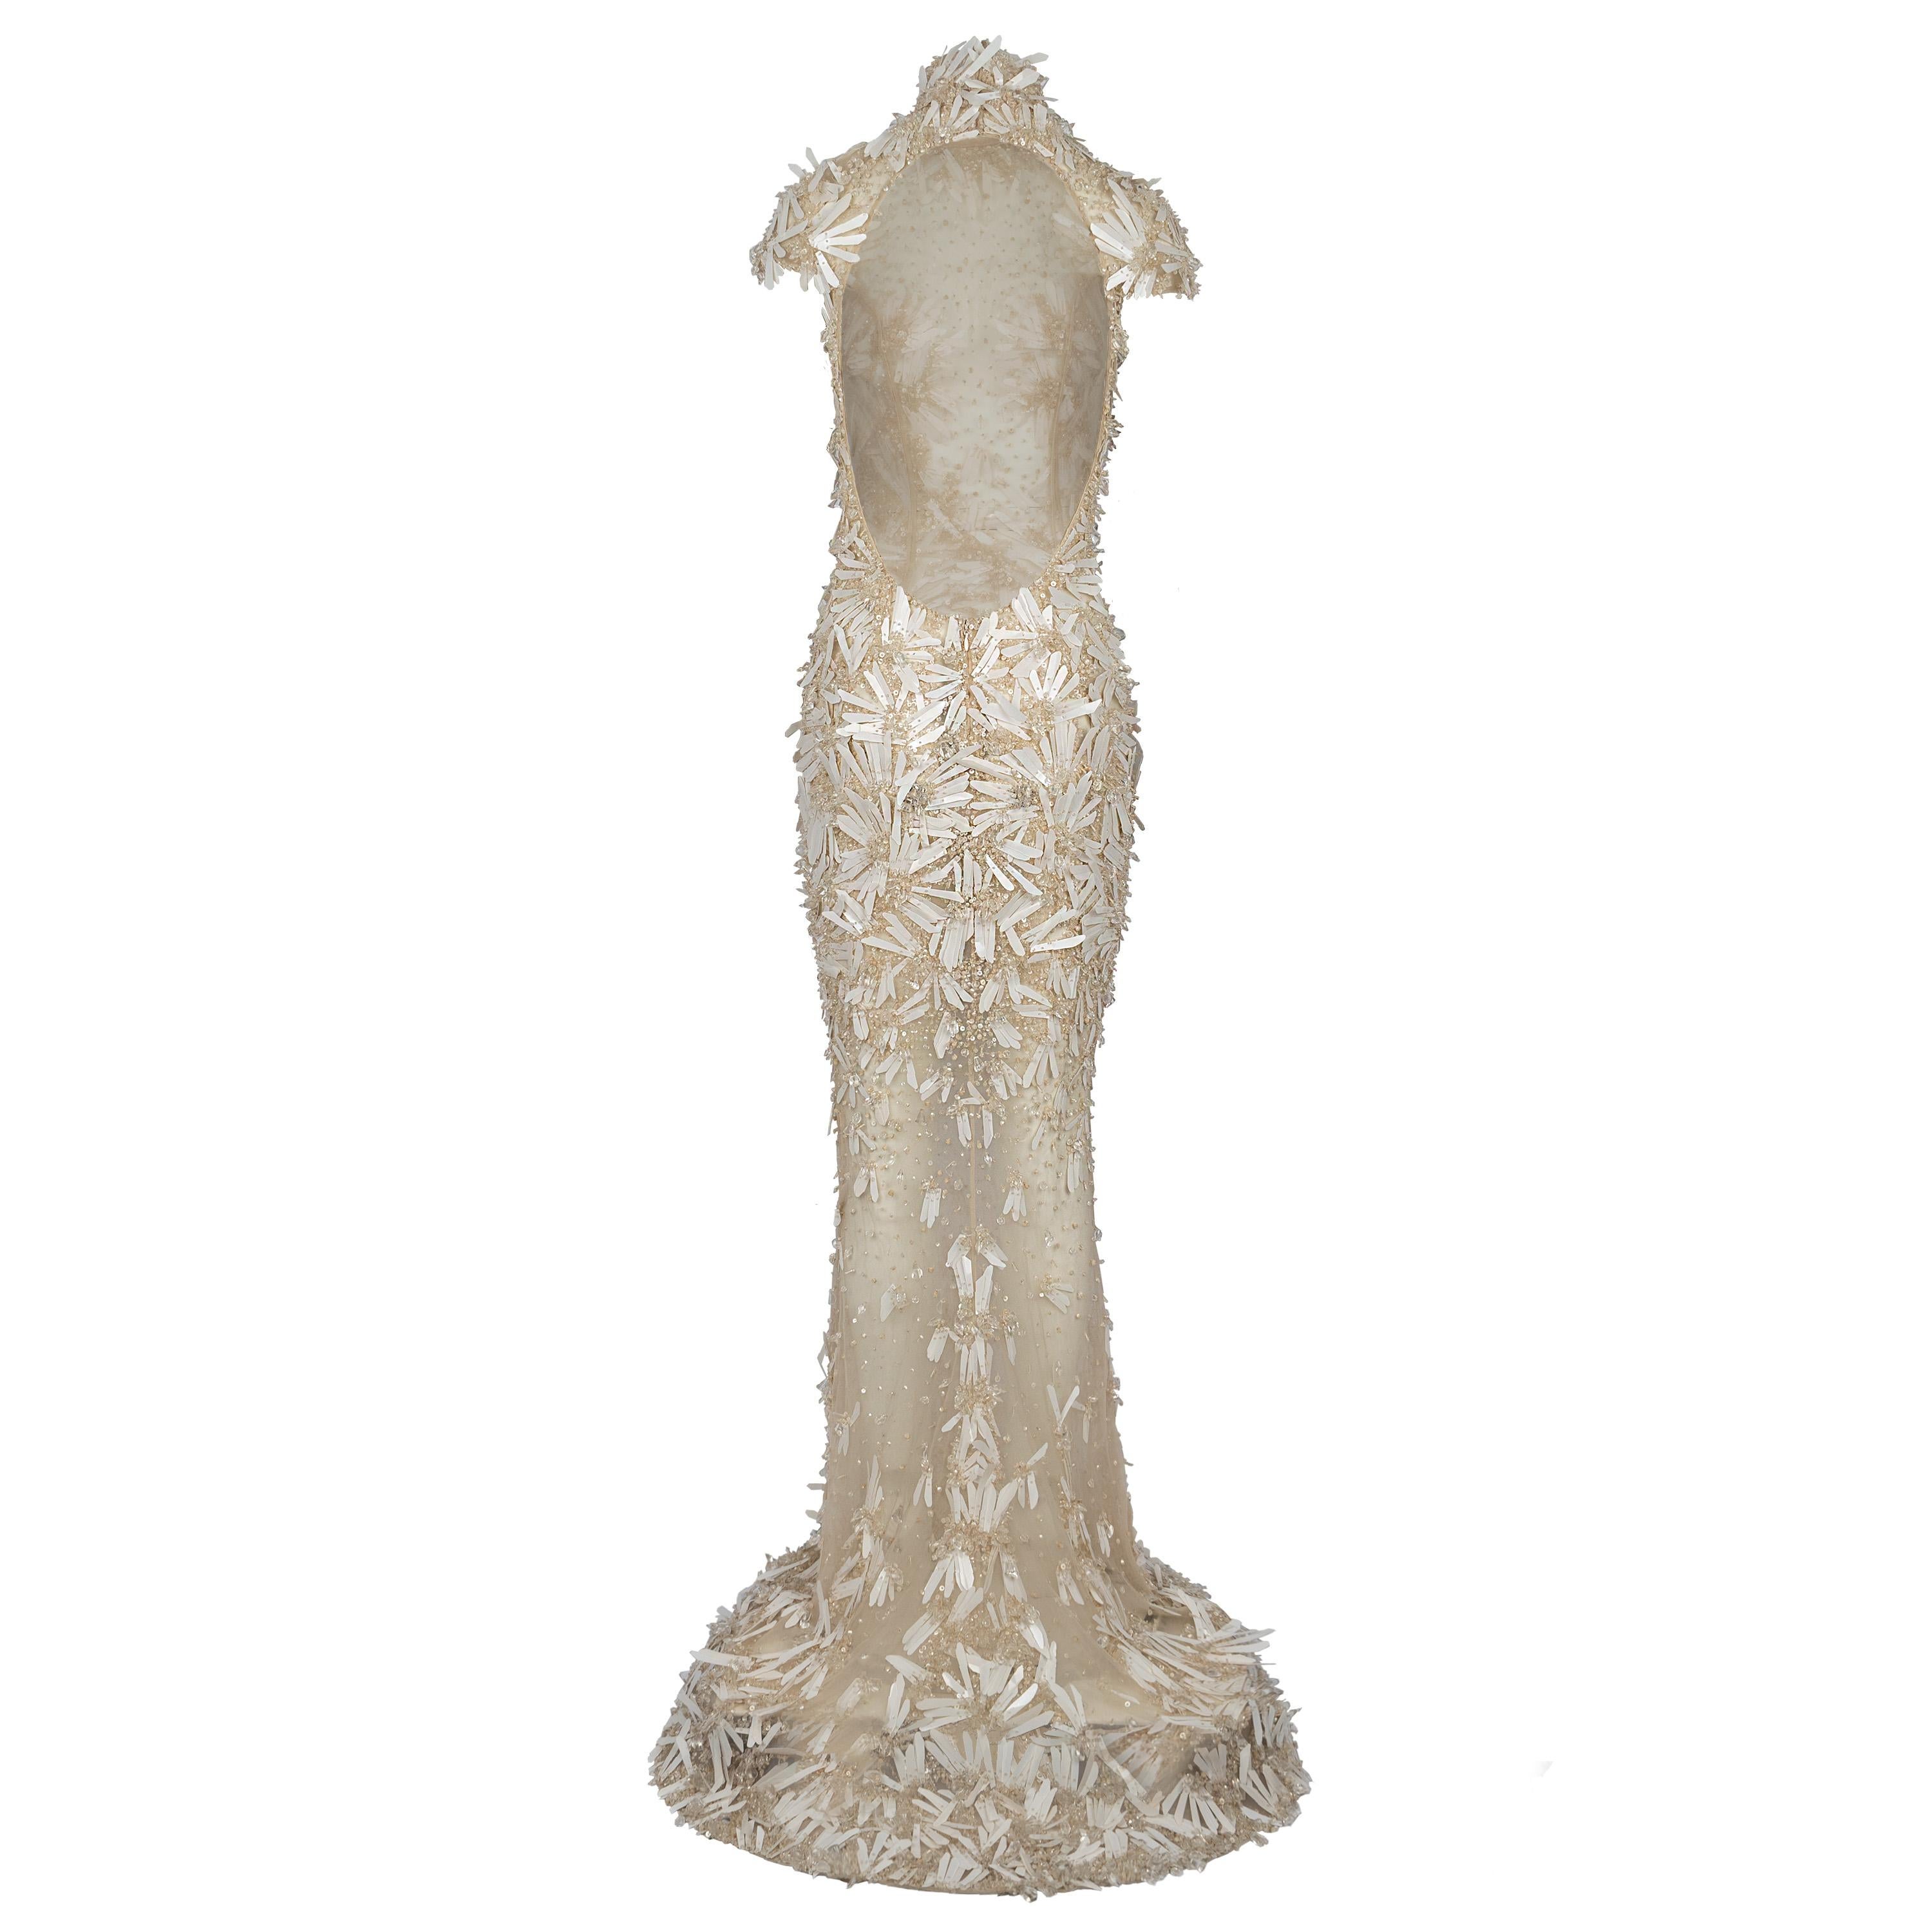 Enchant every crowd with a mythical entrance in the white Zuhair Murad crystal open-back dress with paillettes. The contrast of the modern sheer mesh areas with the reserved closed neck with cup sleeves is one of the captivating elements that this